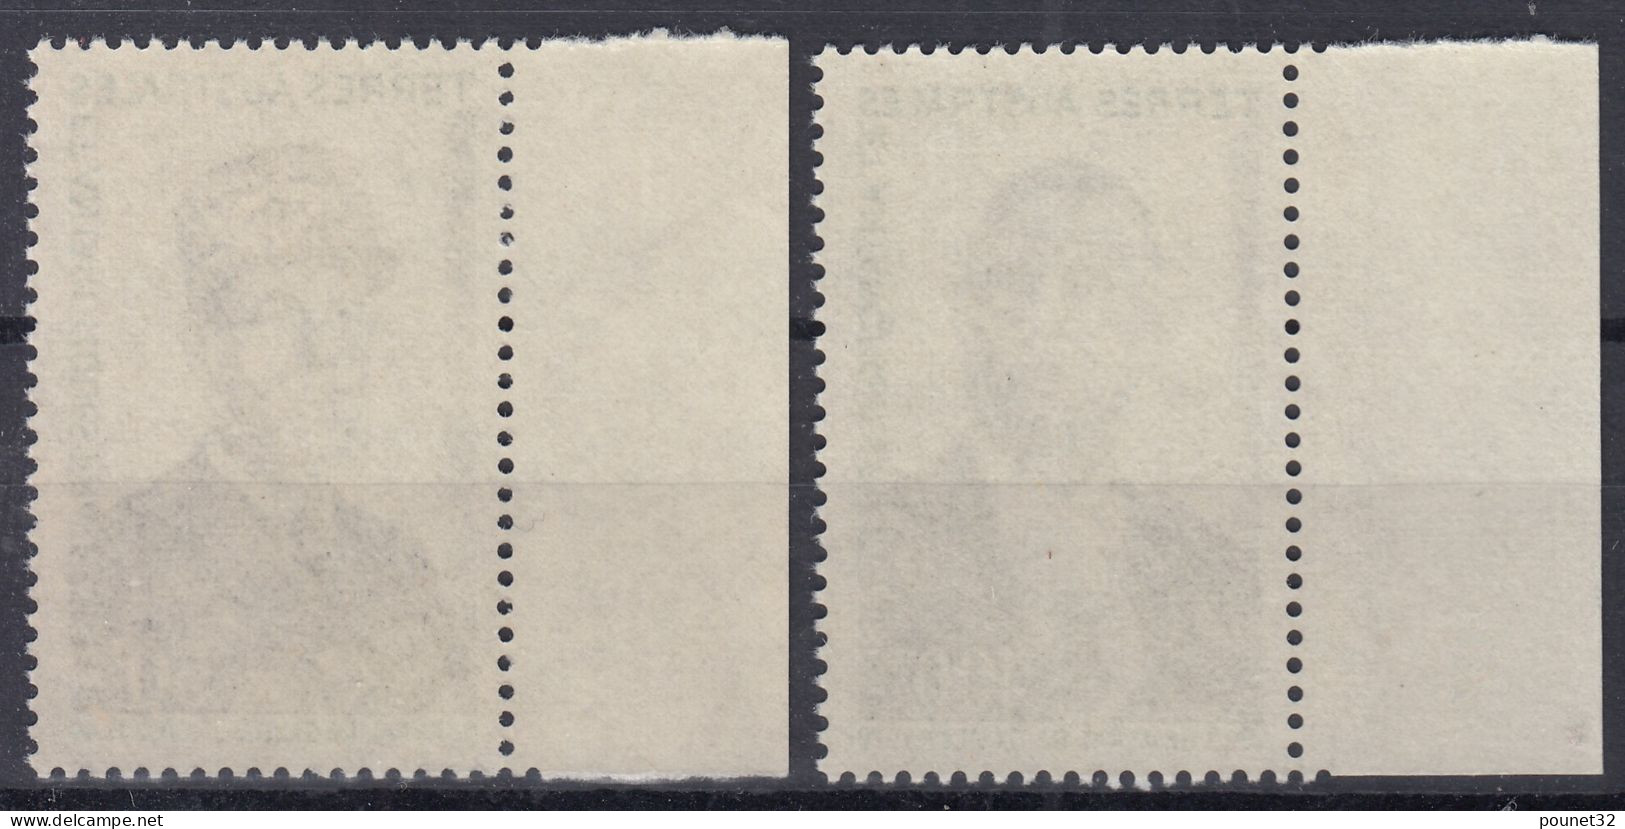 TIMBRE TAAF GENERAL DE GAULLE N° 46 & 47 NEUFS ** GOMME SANS CHARNIERE - Neufs